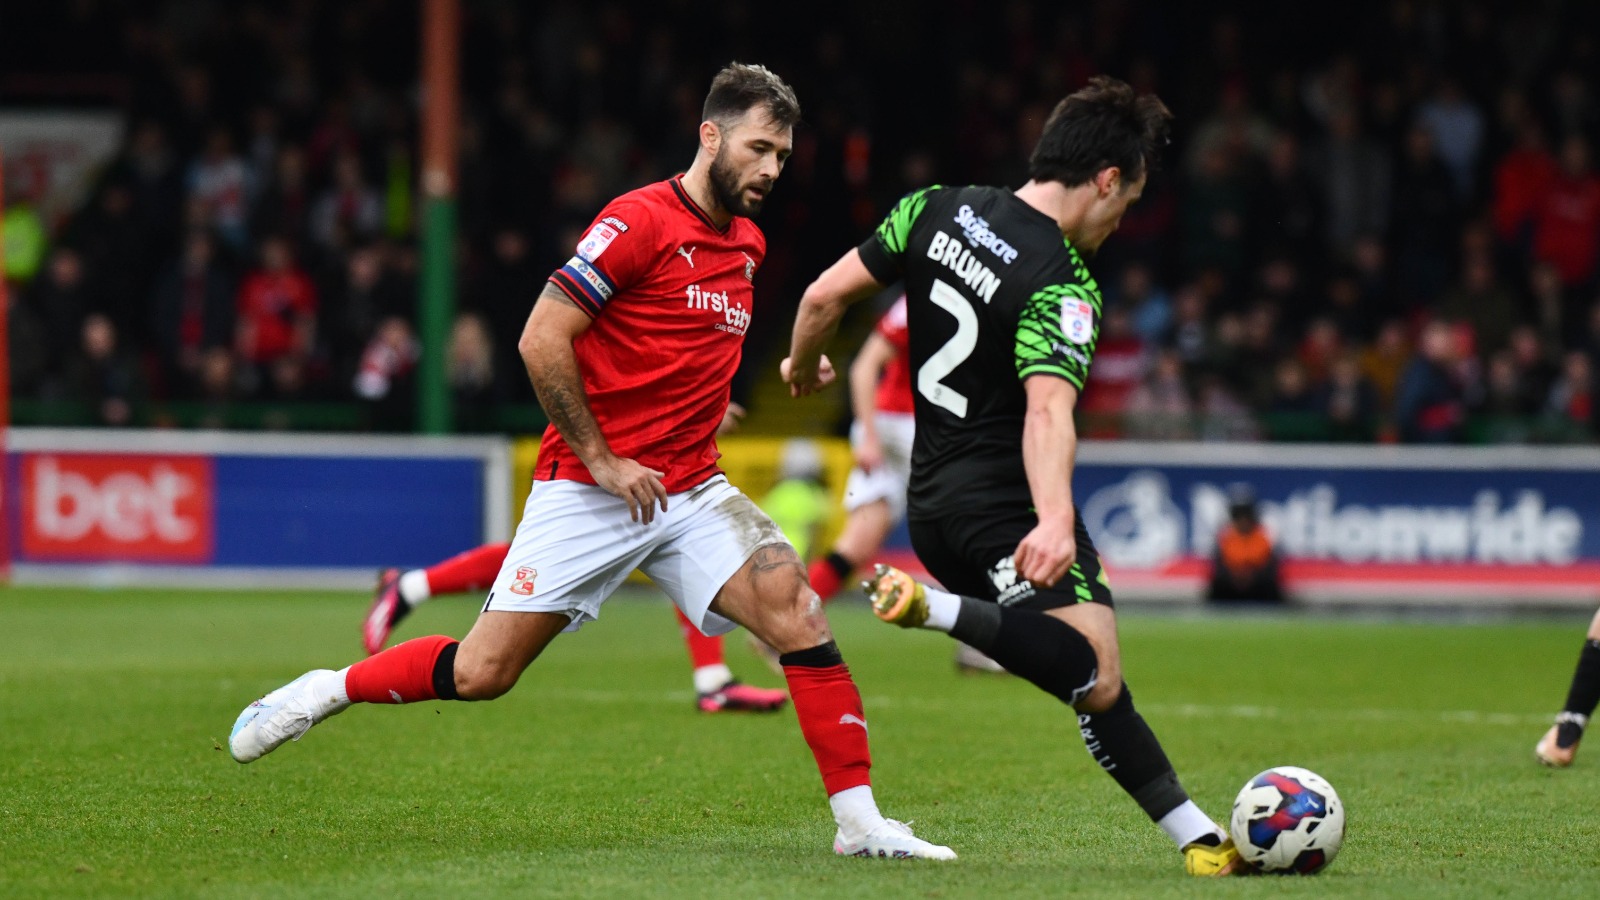 Funnel pressing and how Swindon Town stopped Salford City from playing